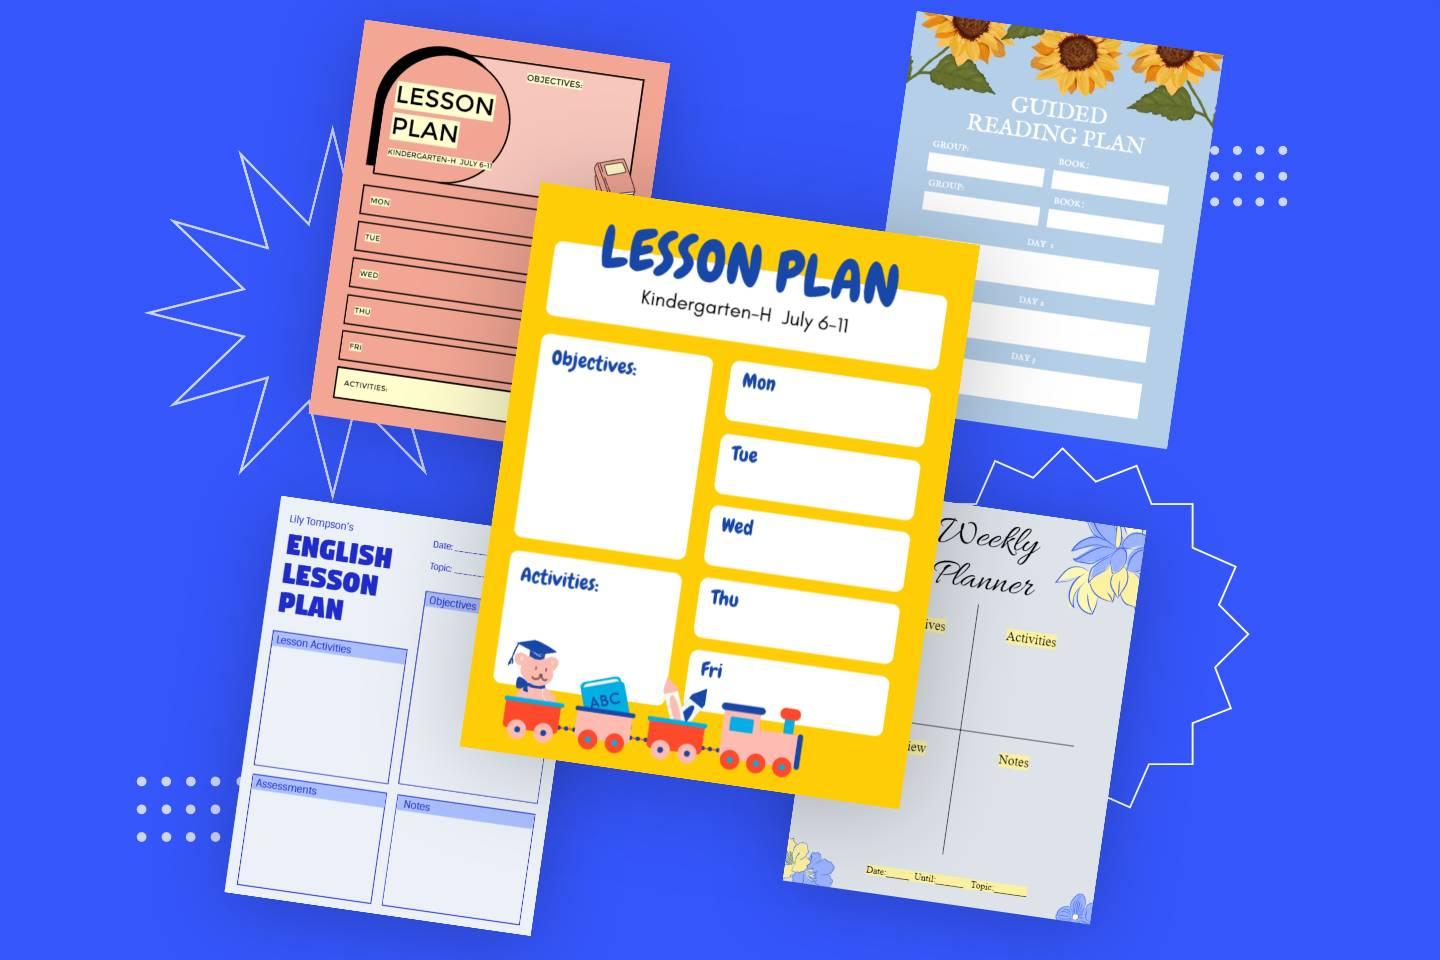 Five lesson plan templates from Fotor online lesson plan maker